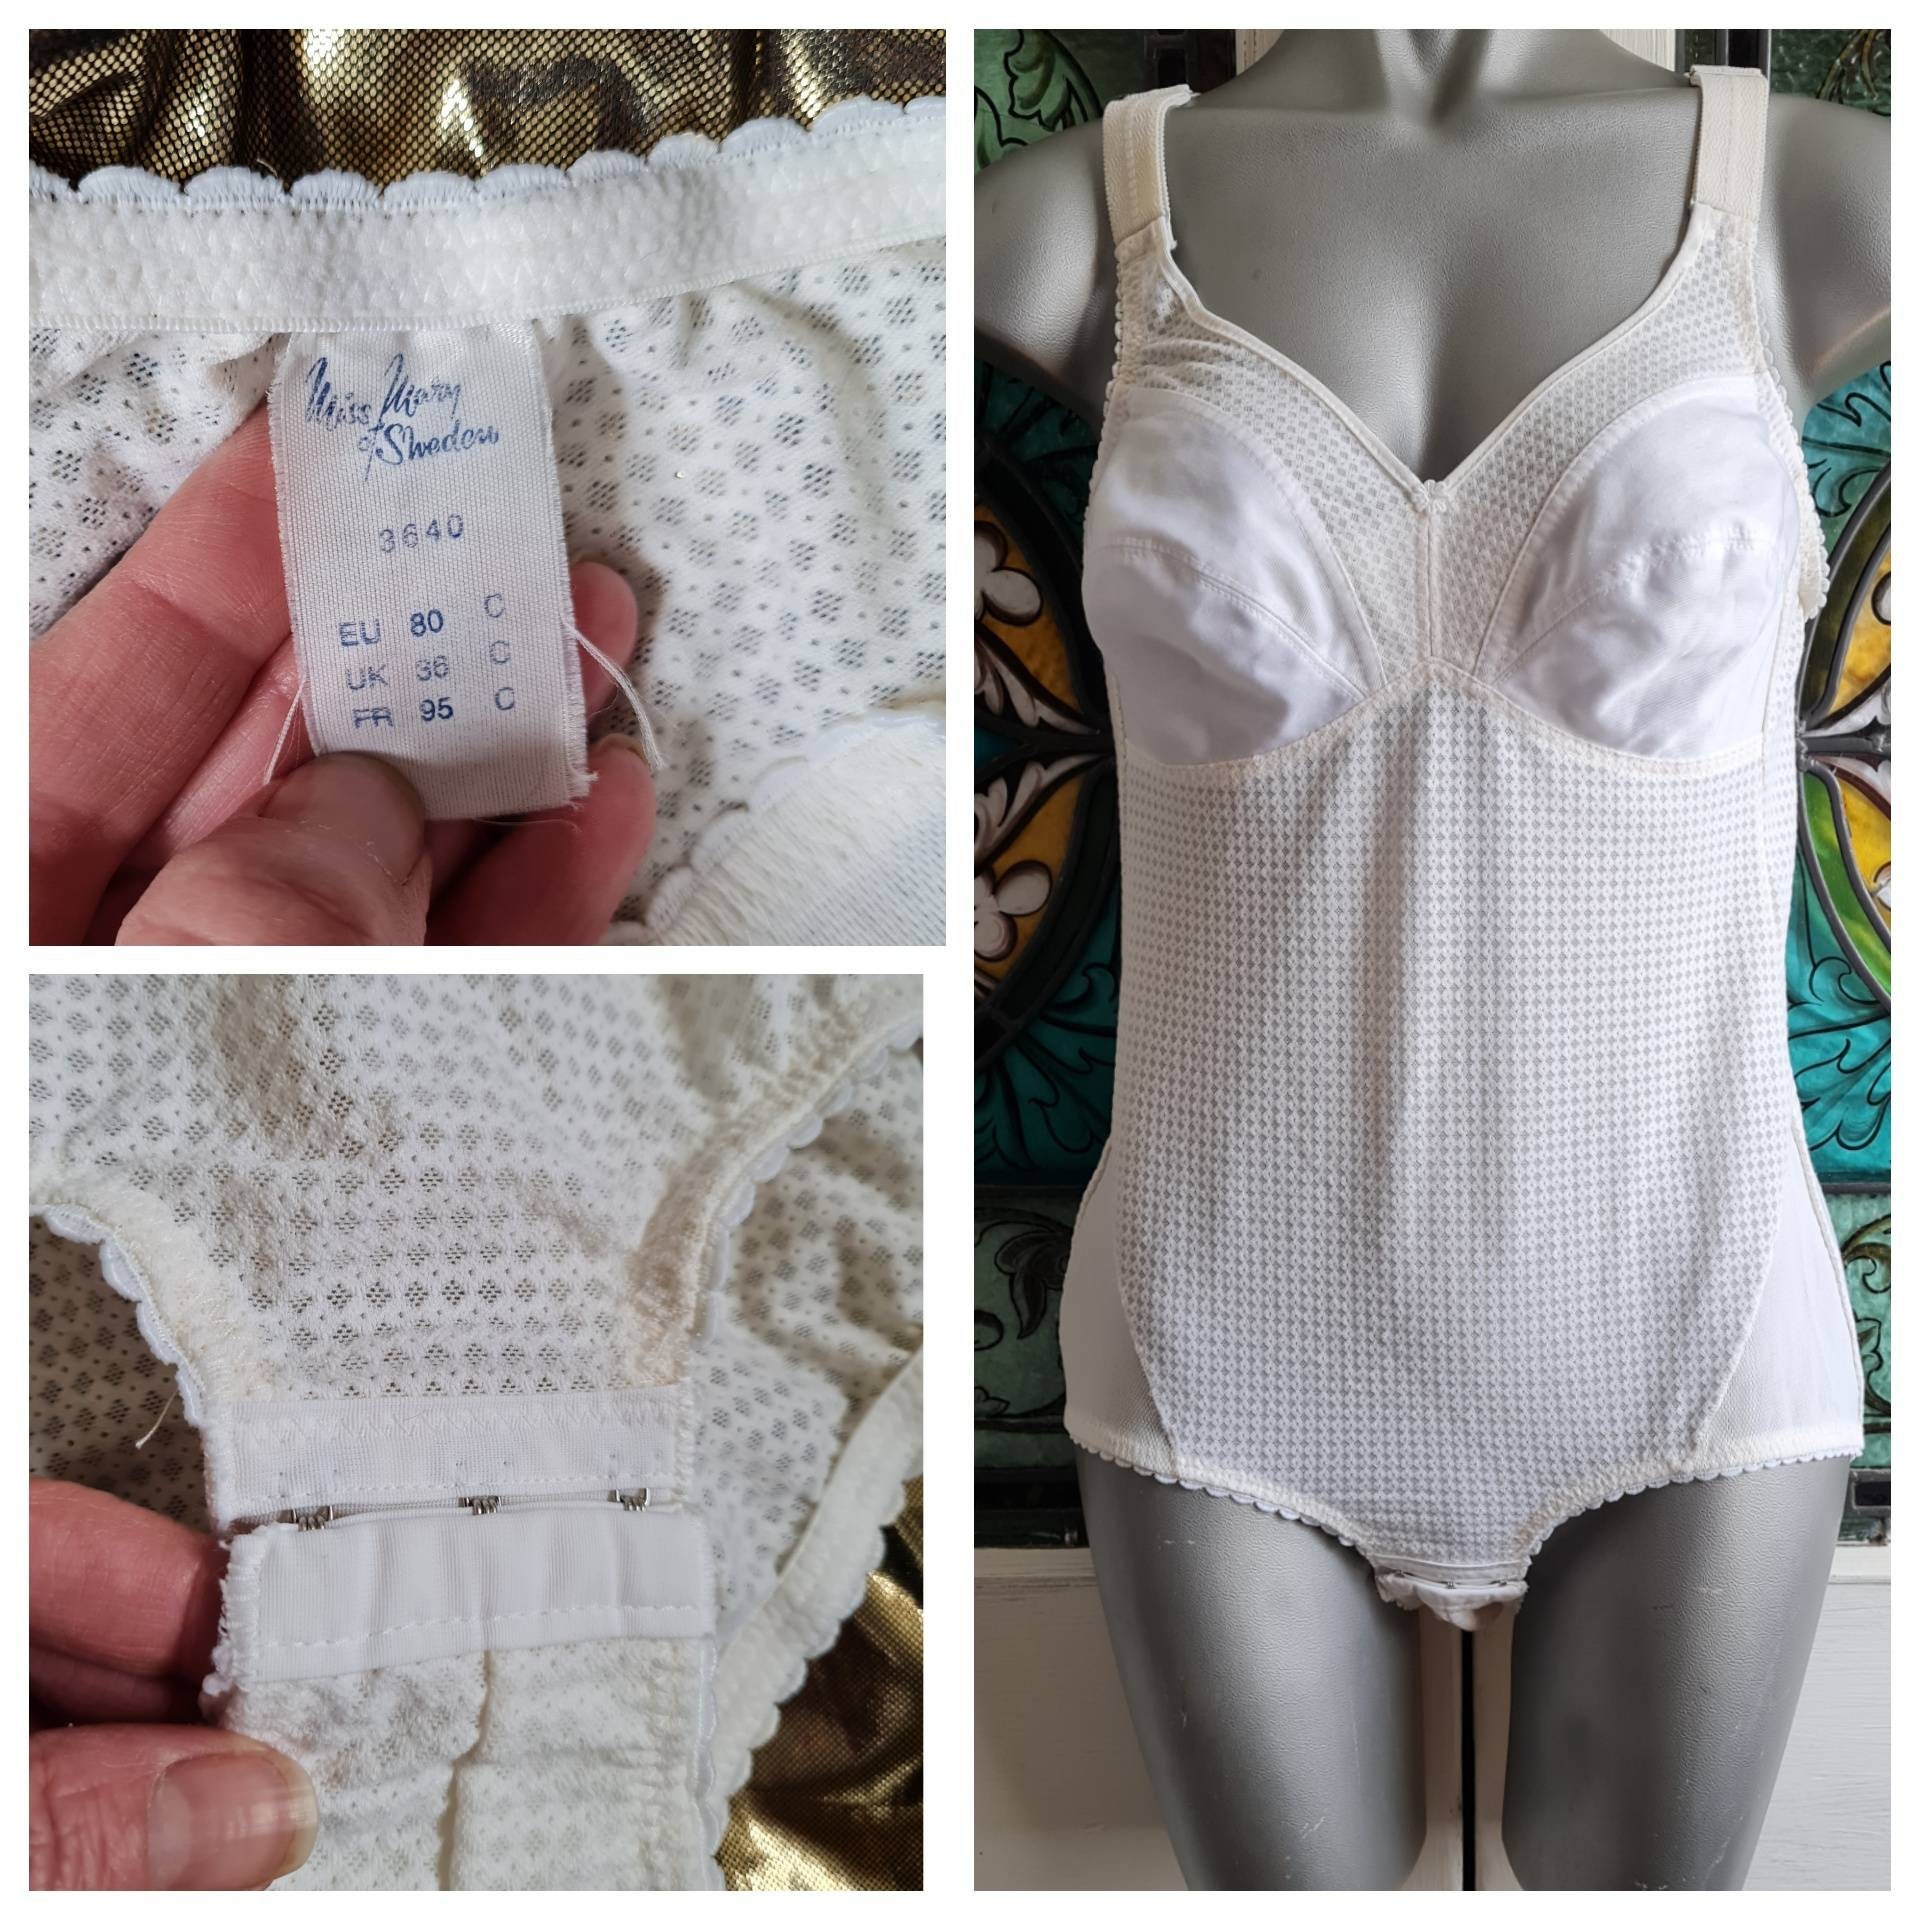 70s Body Shaper White Girdle Lingerie by SEARS Vintage 1970s Pin-up White  Support Garment Shapewear 32 M/L -  Canada